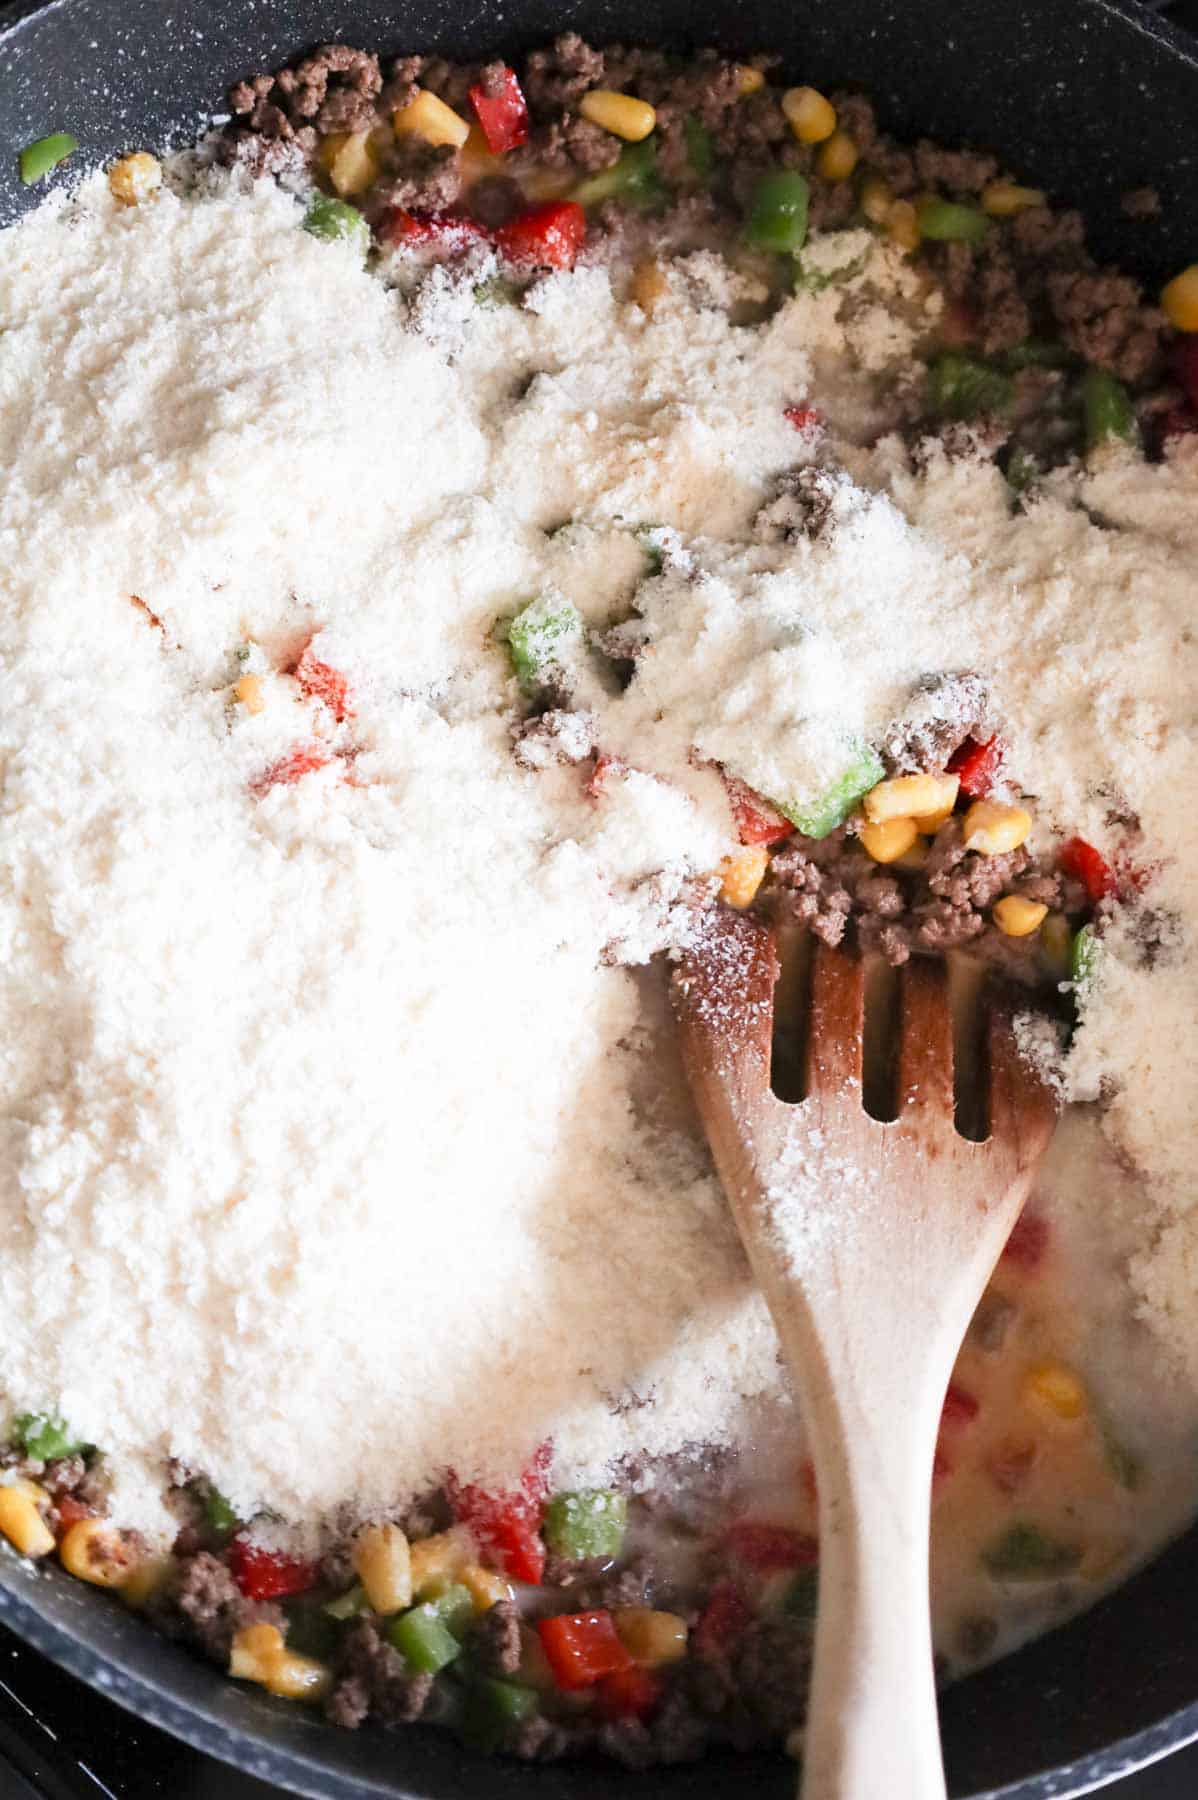 instant mashed potato mix added to skillet with ground beef and veggie mixture